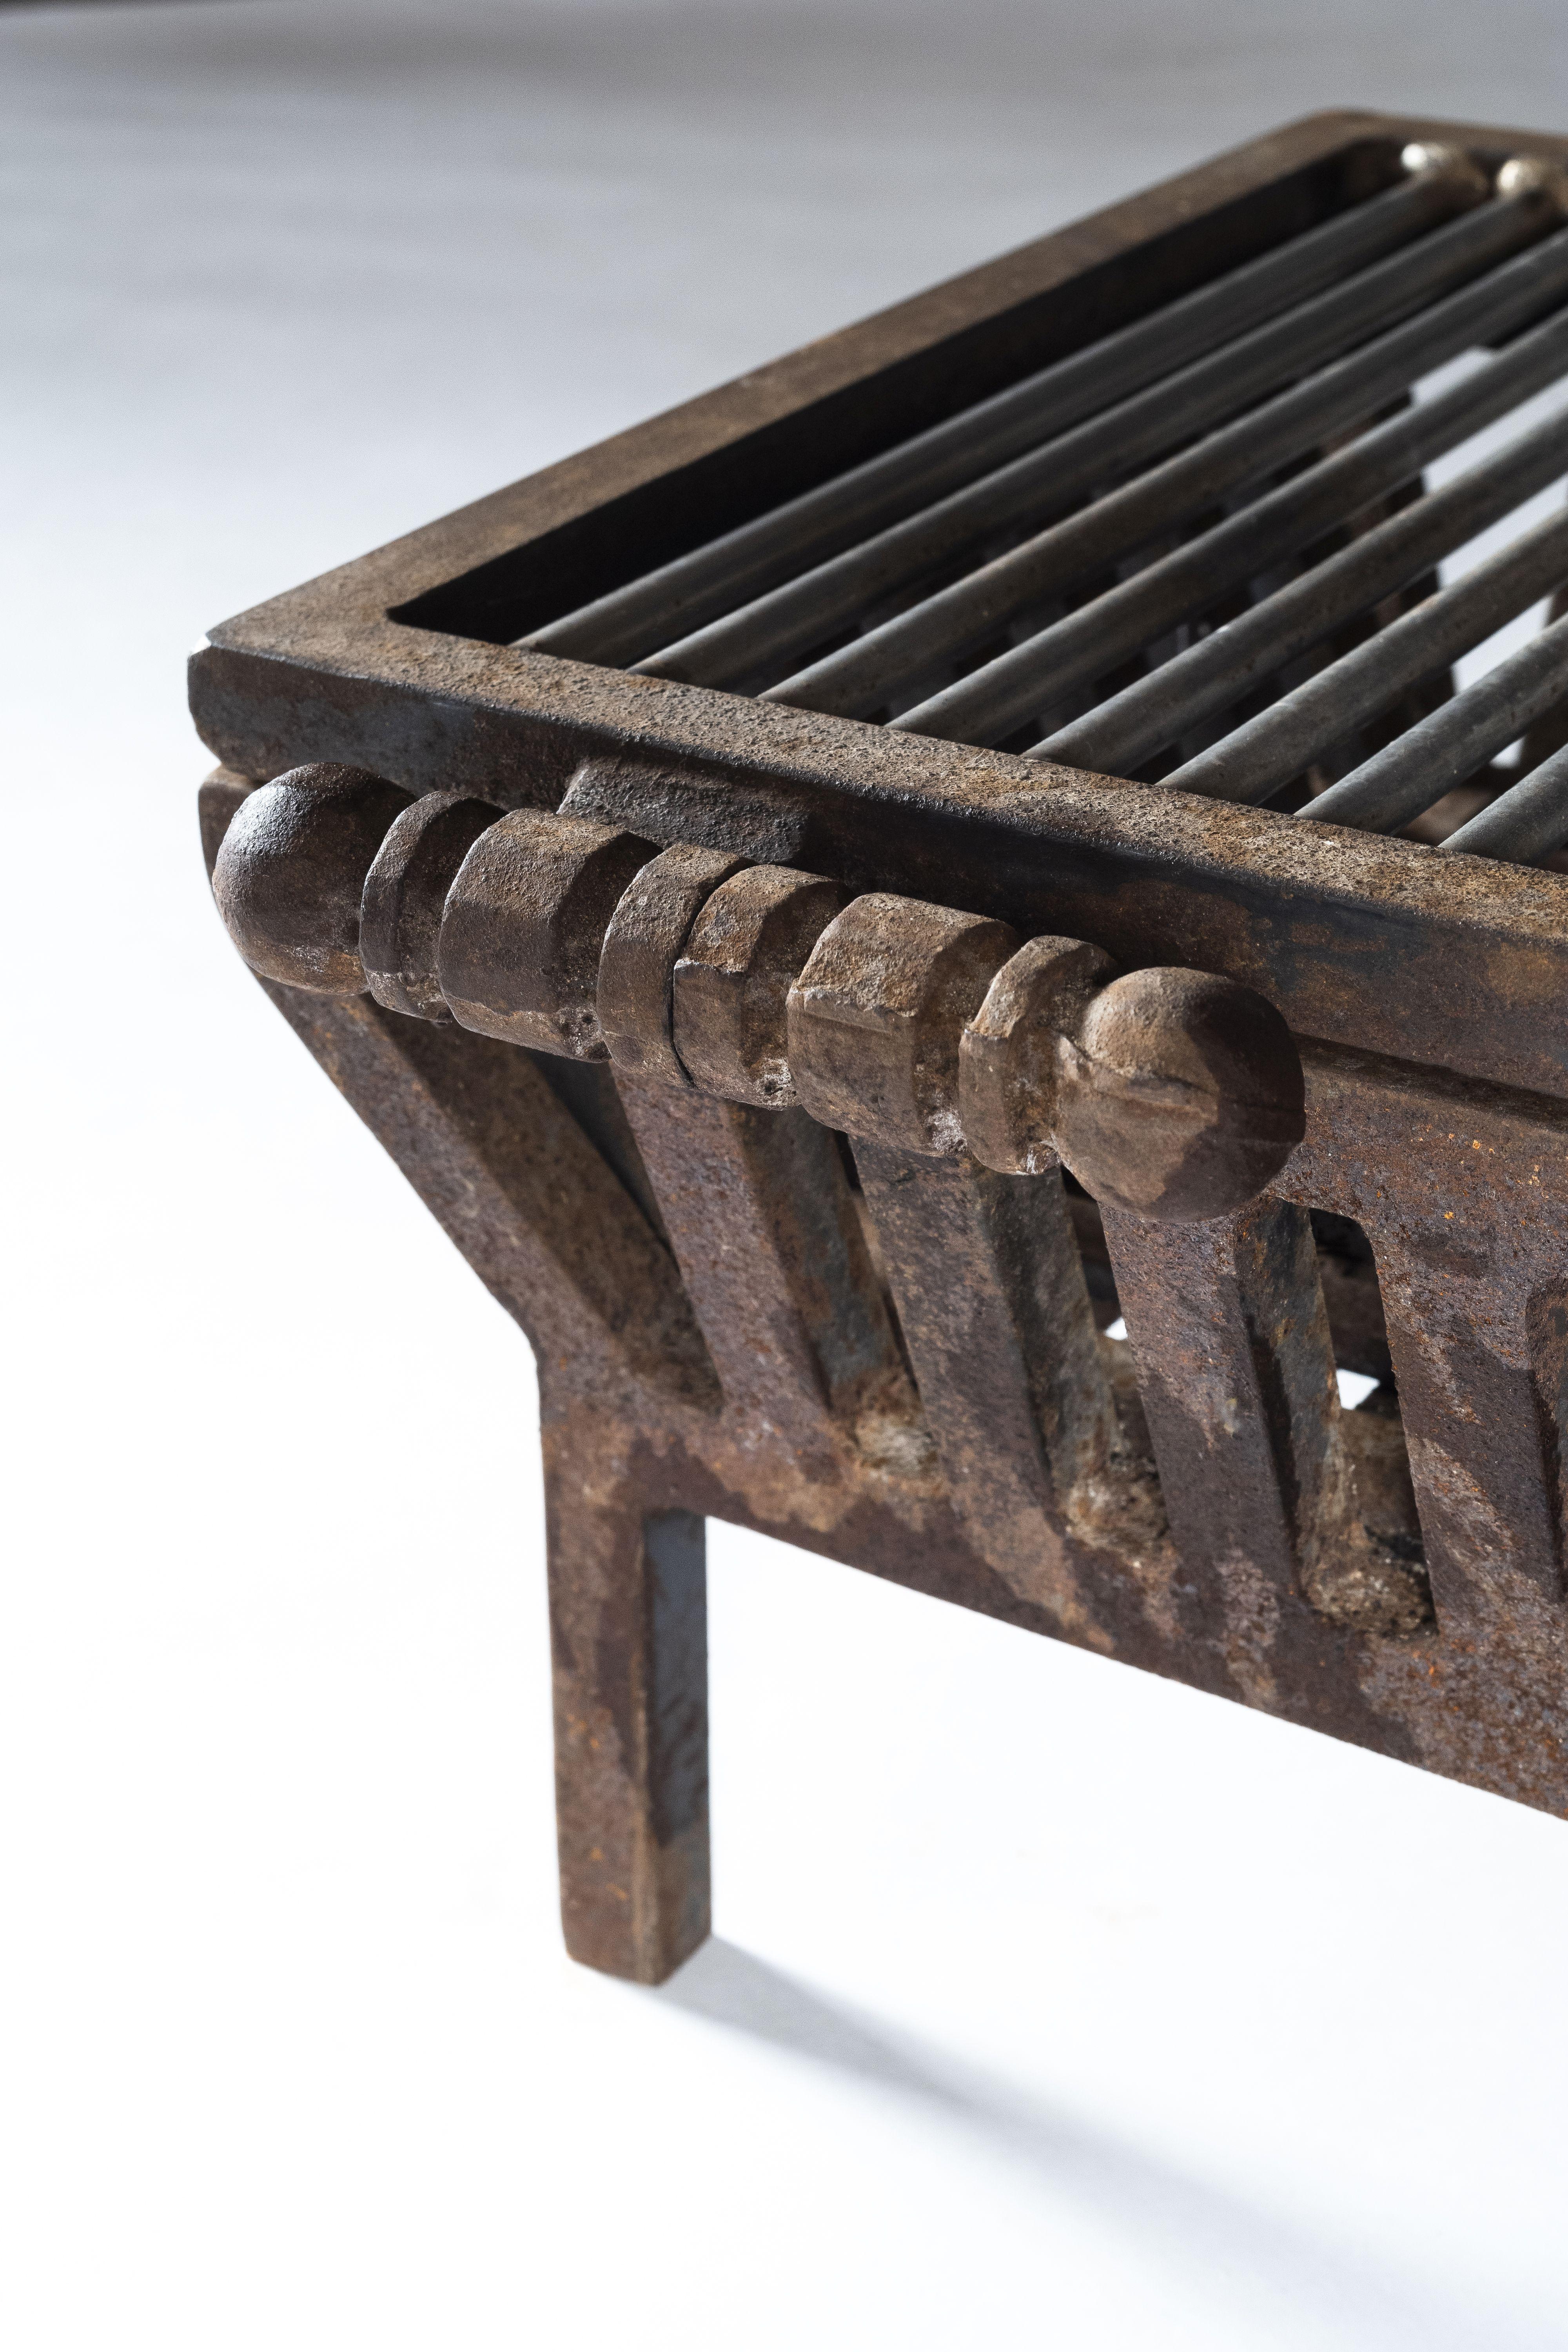 The BBQ Fire Grate - Untreated Steel 
A Fire grate to incorporate a BBQ cooking grill.

 